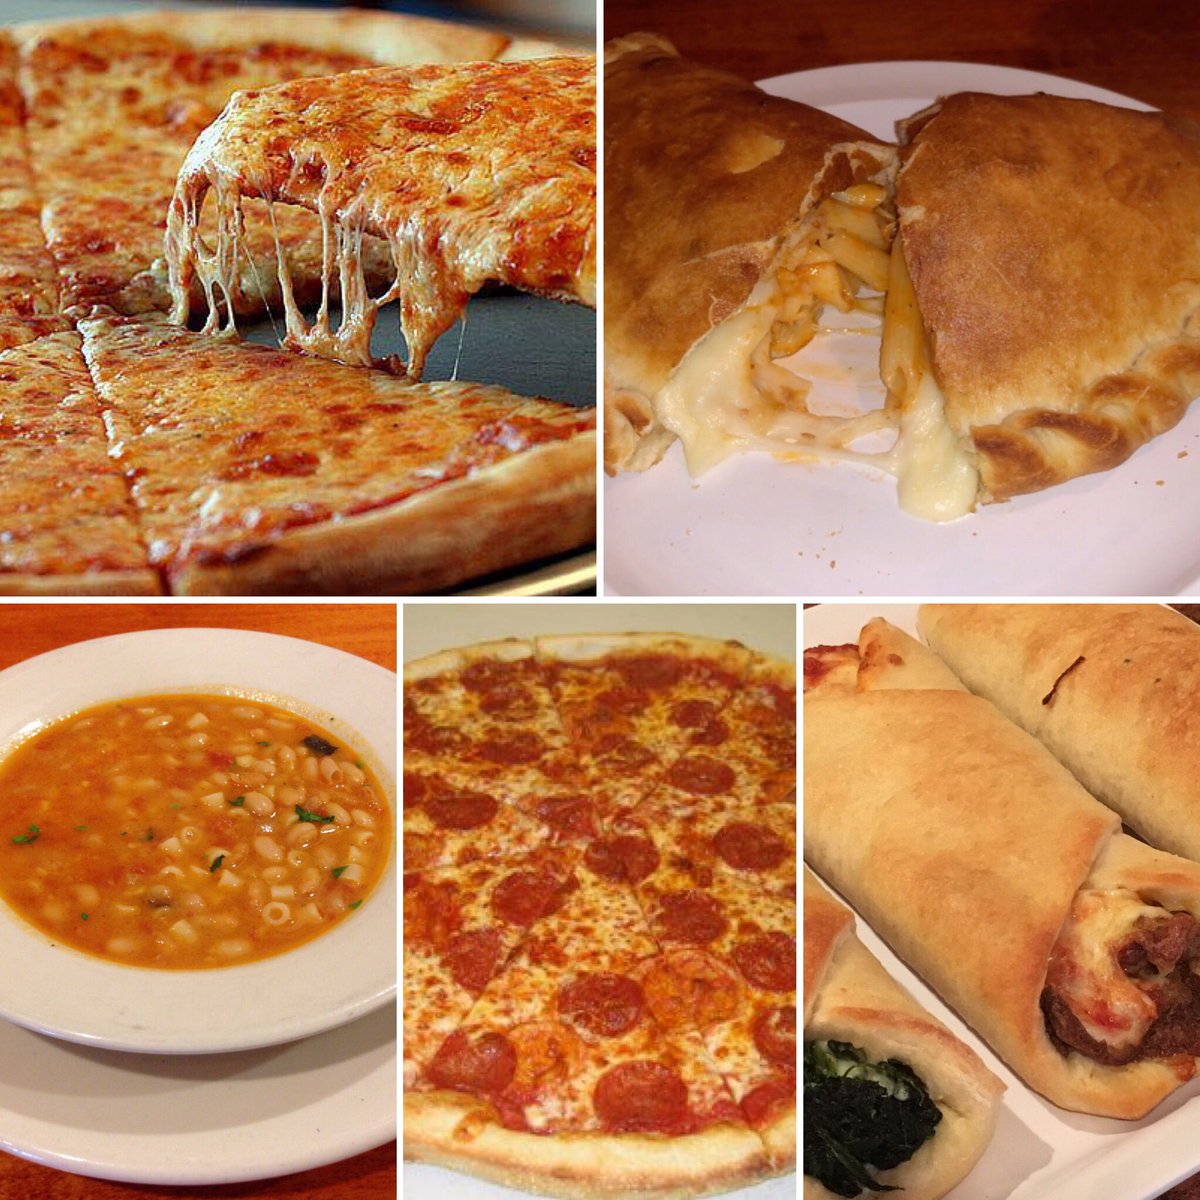 Winter storm coming today.  Stop by and pick up some comfort food!  #bestpizza #westchestereats